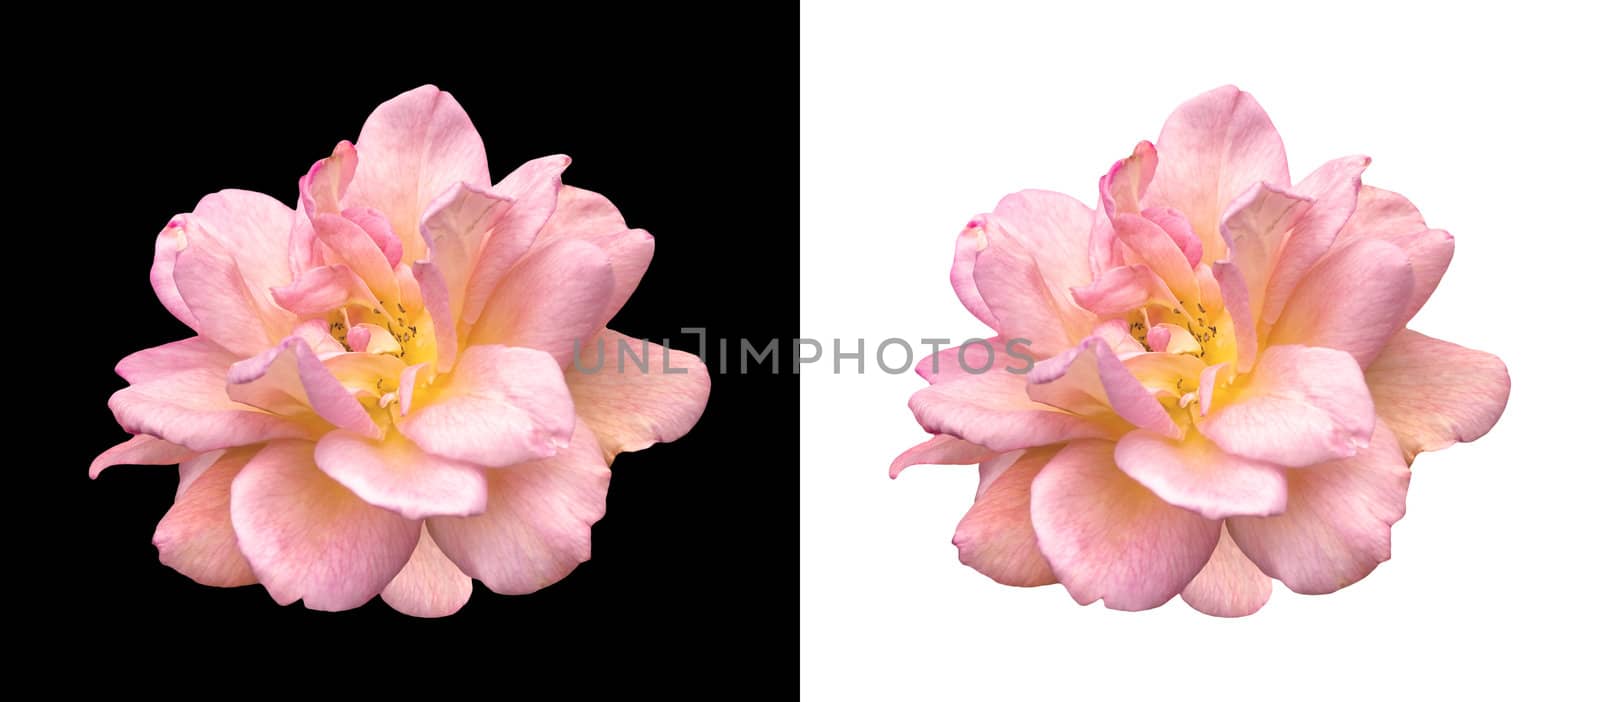 pink rose over black and white isolated backgrounds